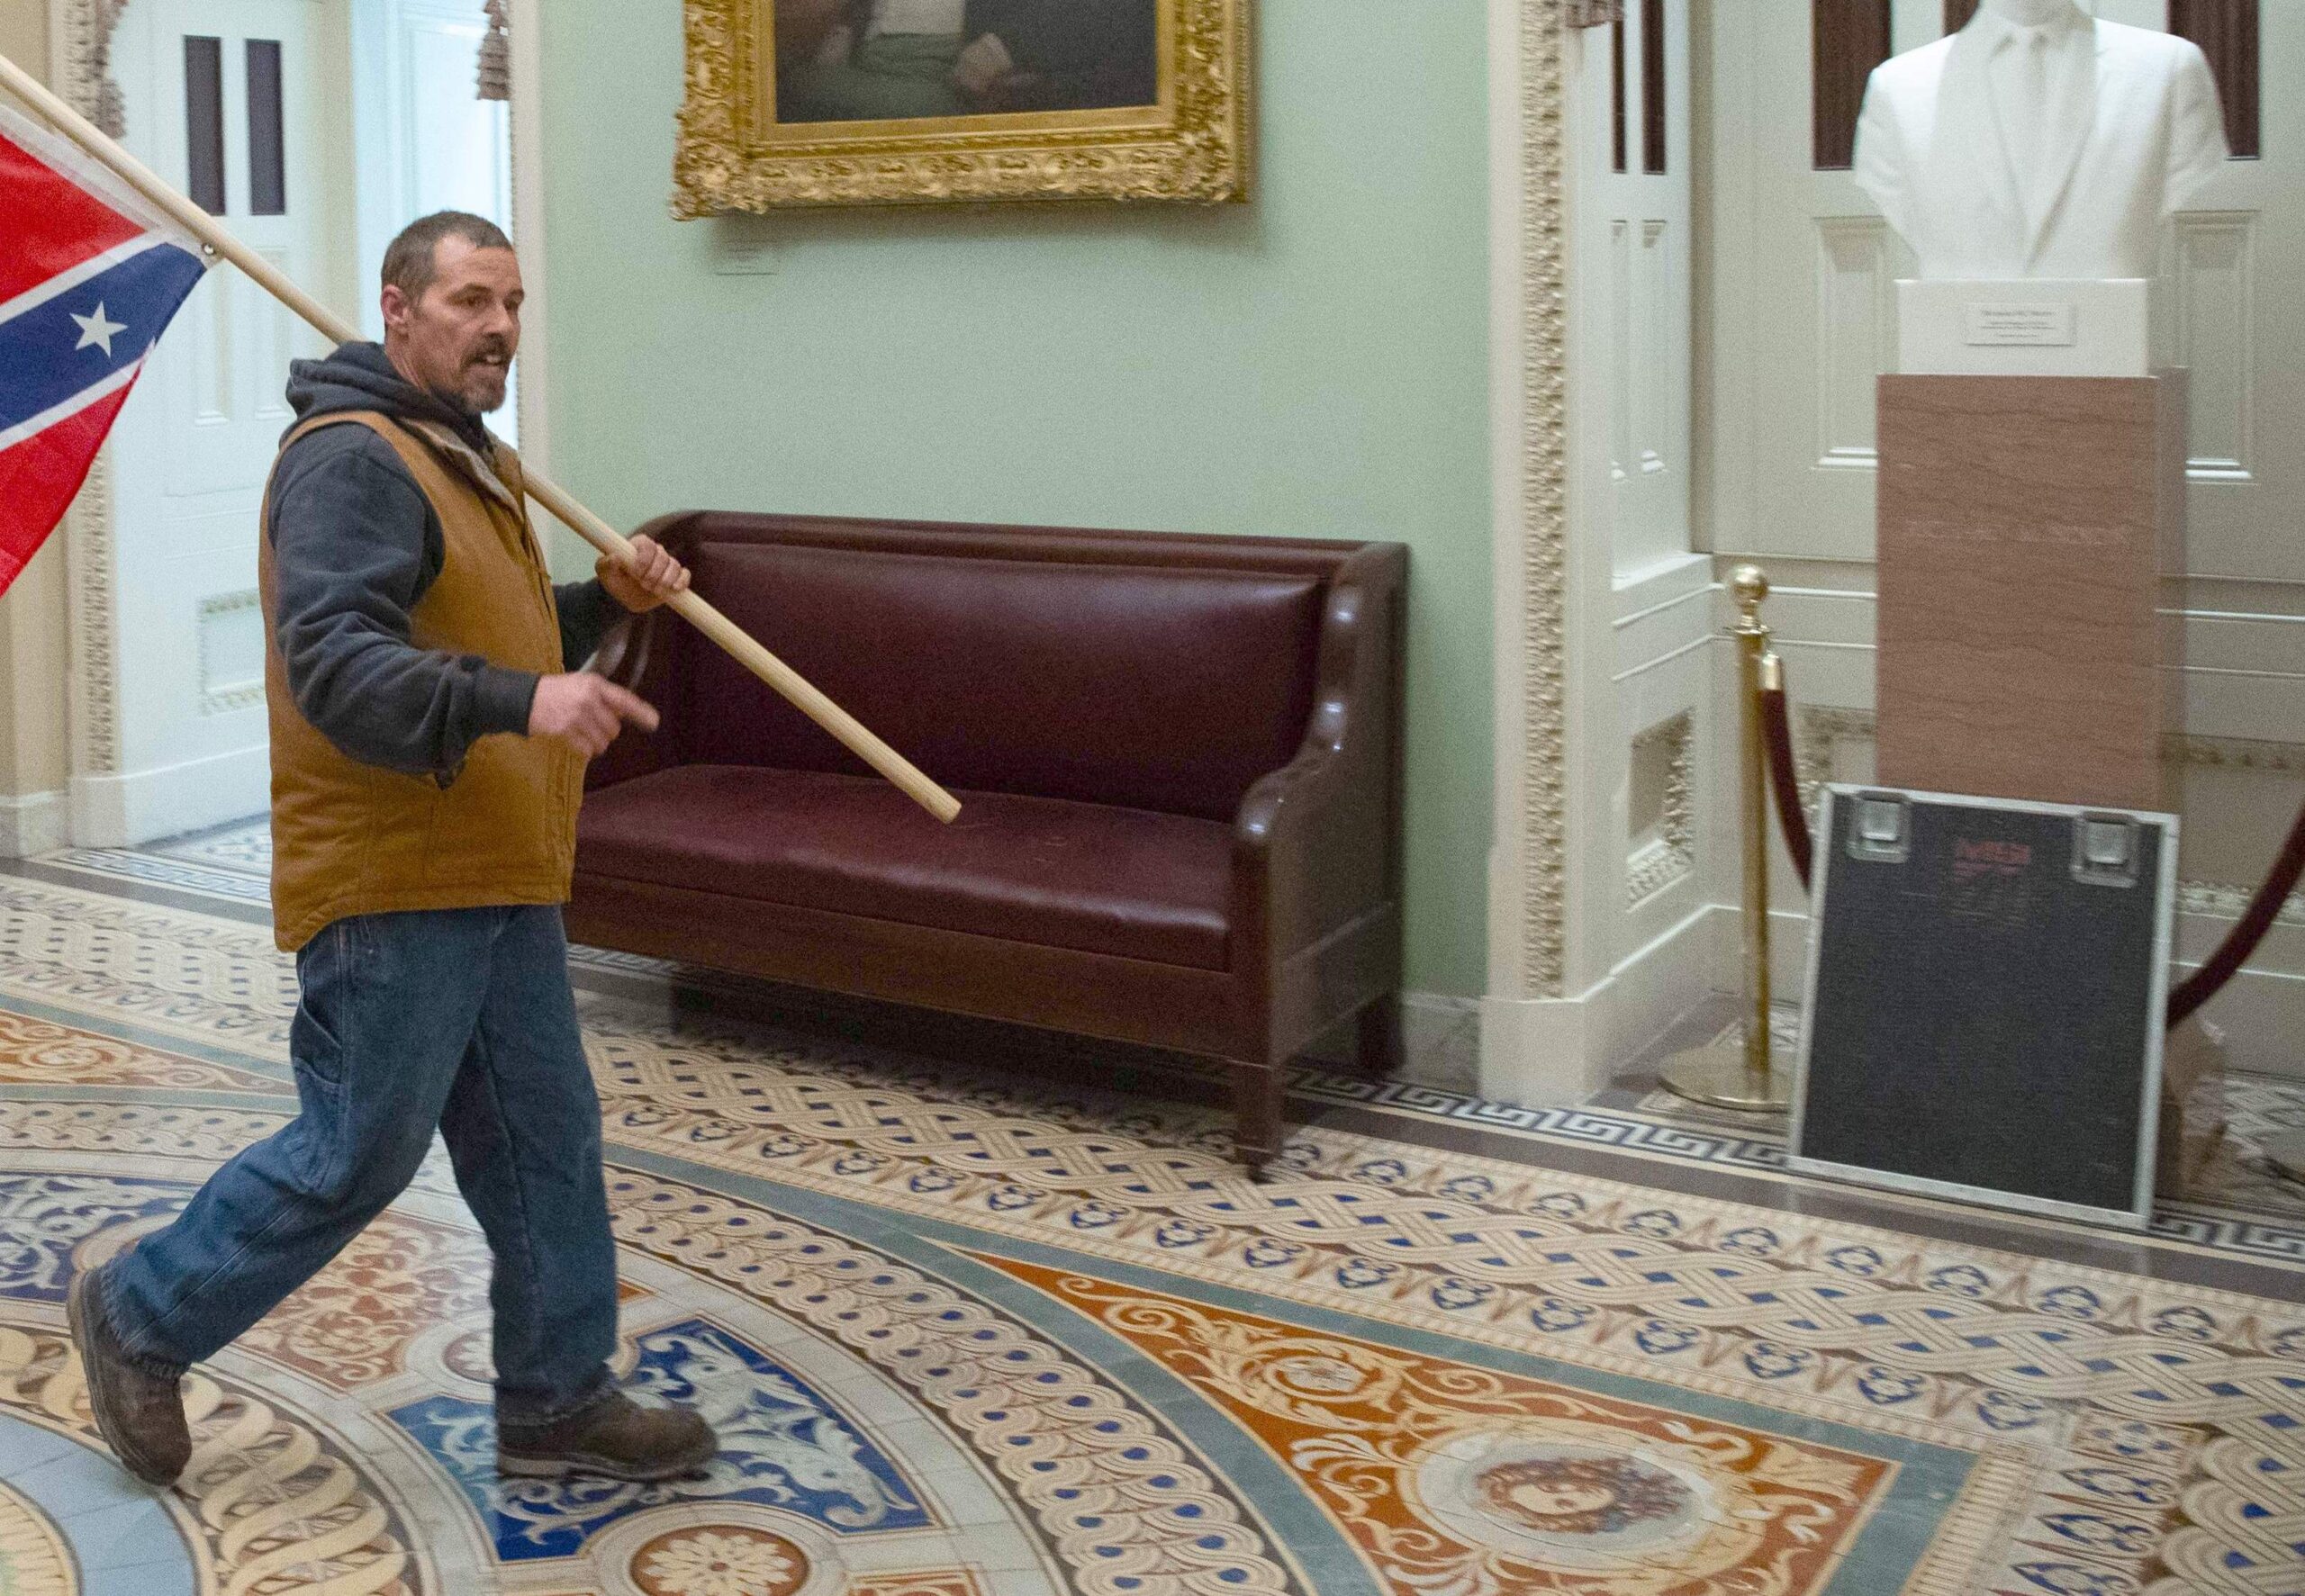 Rioters who broke into the US Capitol on January 6, 2021 used a looted Maryland Sound International rack lid (seen on right) as a shield/weapon before abandoning it. Photo: Saul Loeb/AFP via Getty Images.